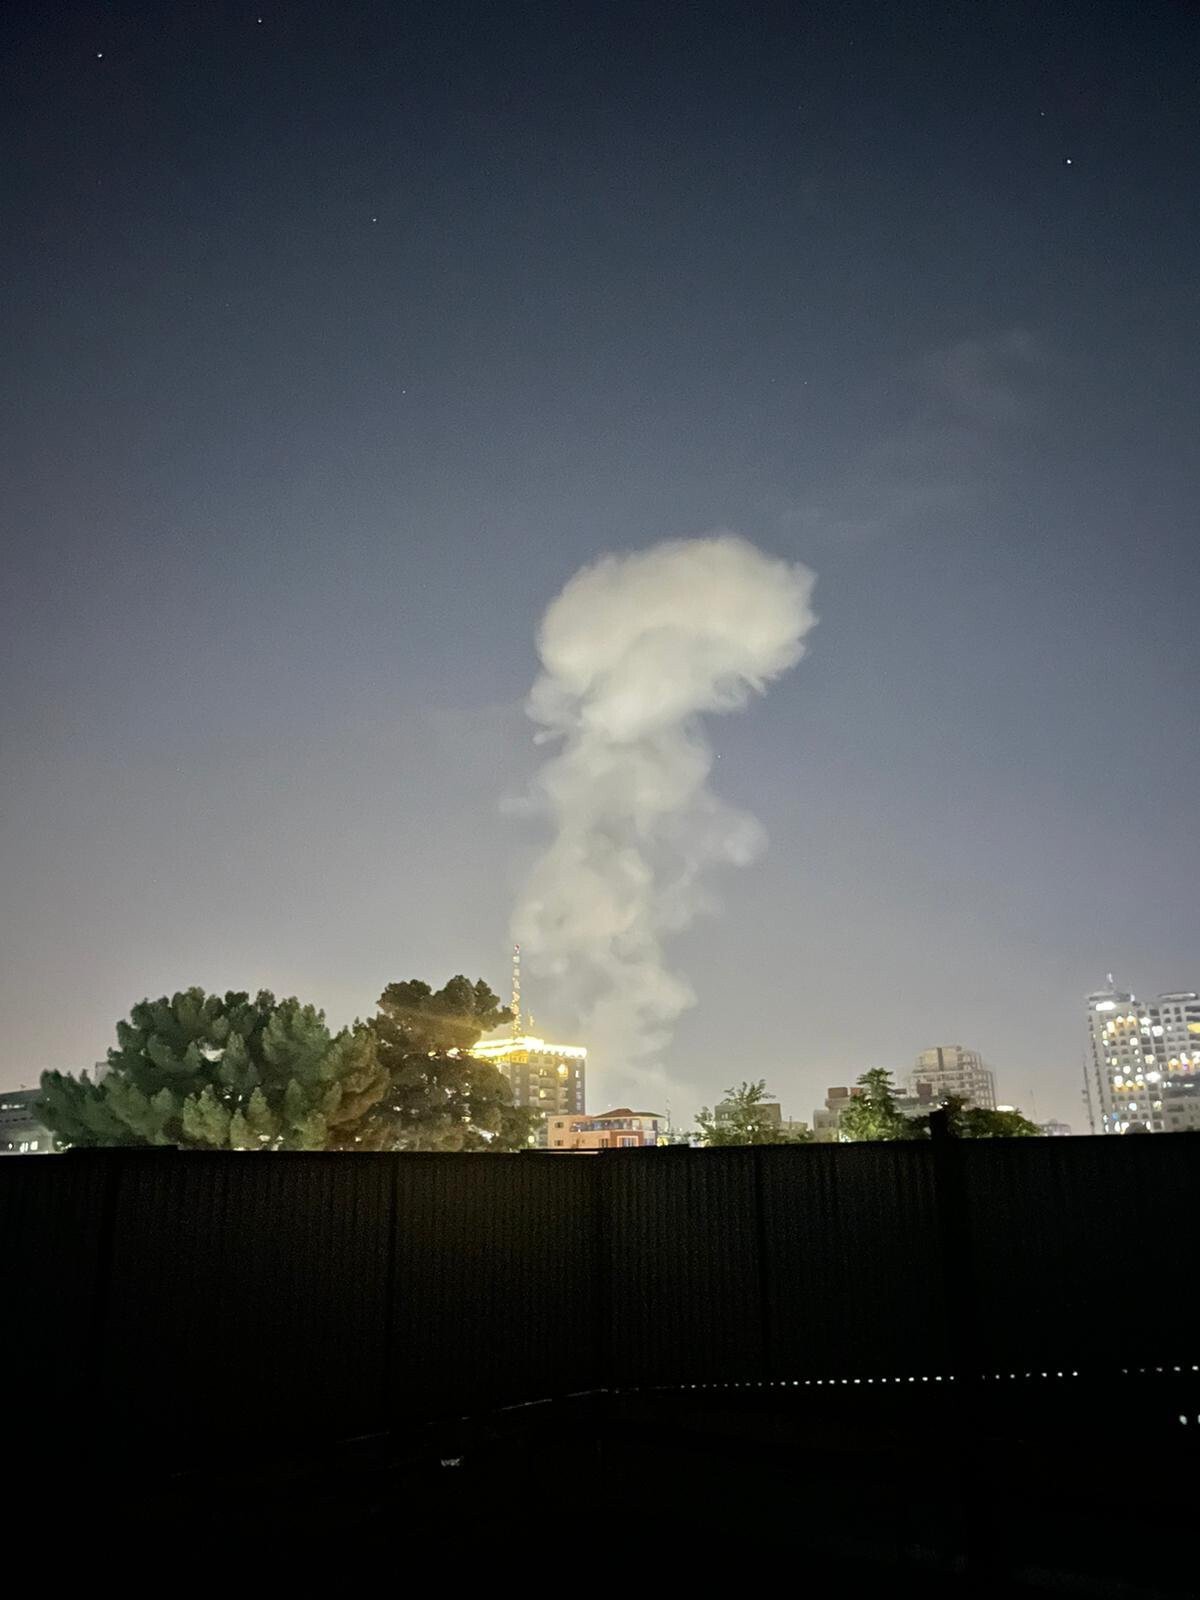 <i>Brent Swails/CNN</i><br/>A powerful blast occurred inside central Kabul on Tuesday evening according to CNN's team on the ground. The blast was followed by gunfire and sirens.